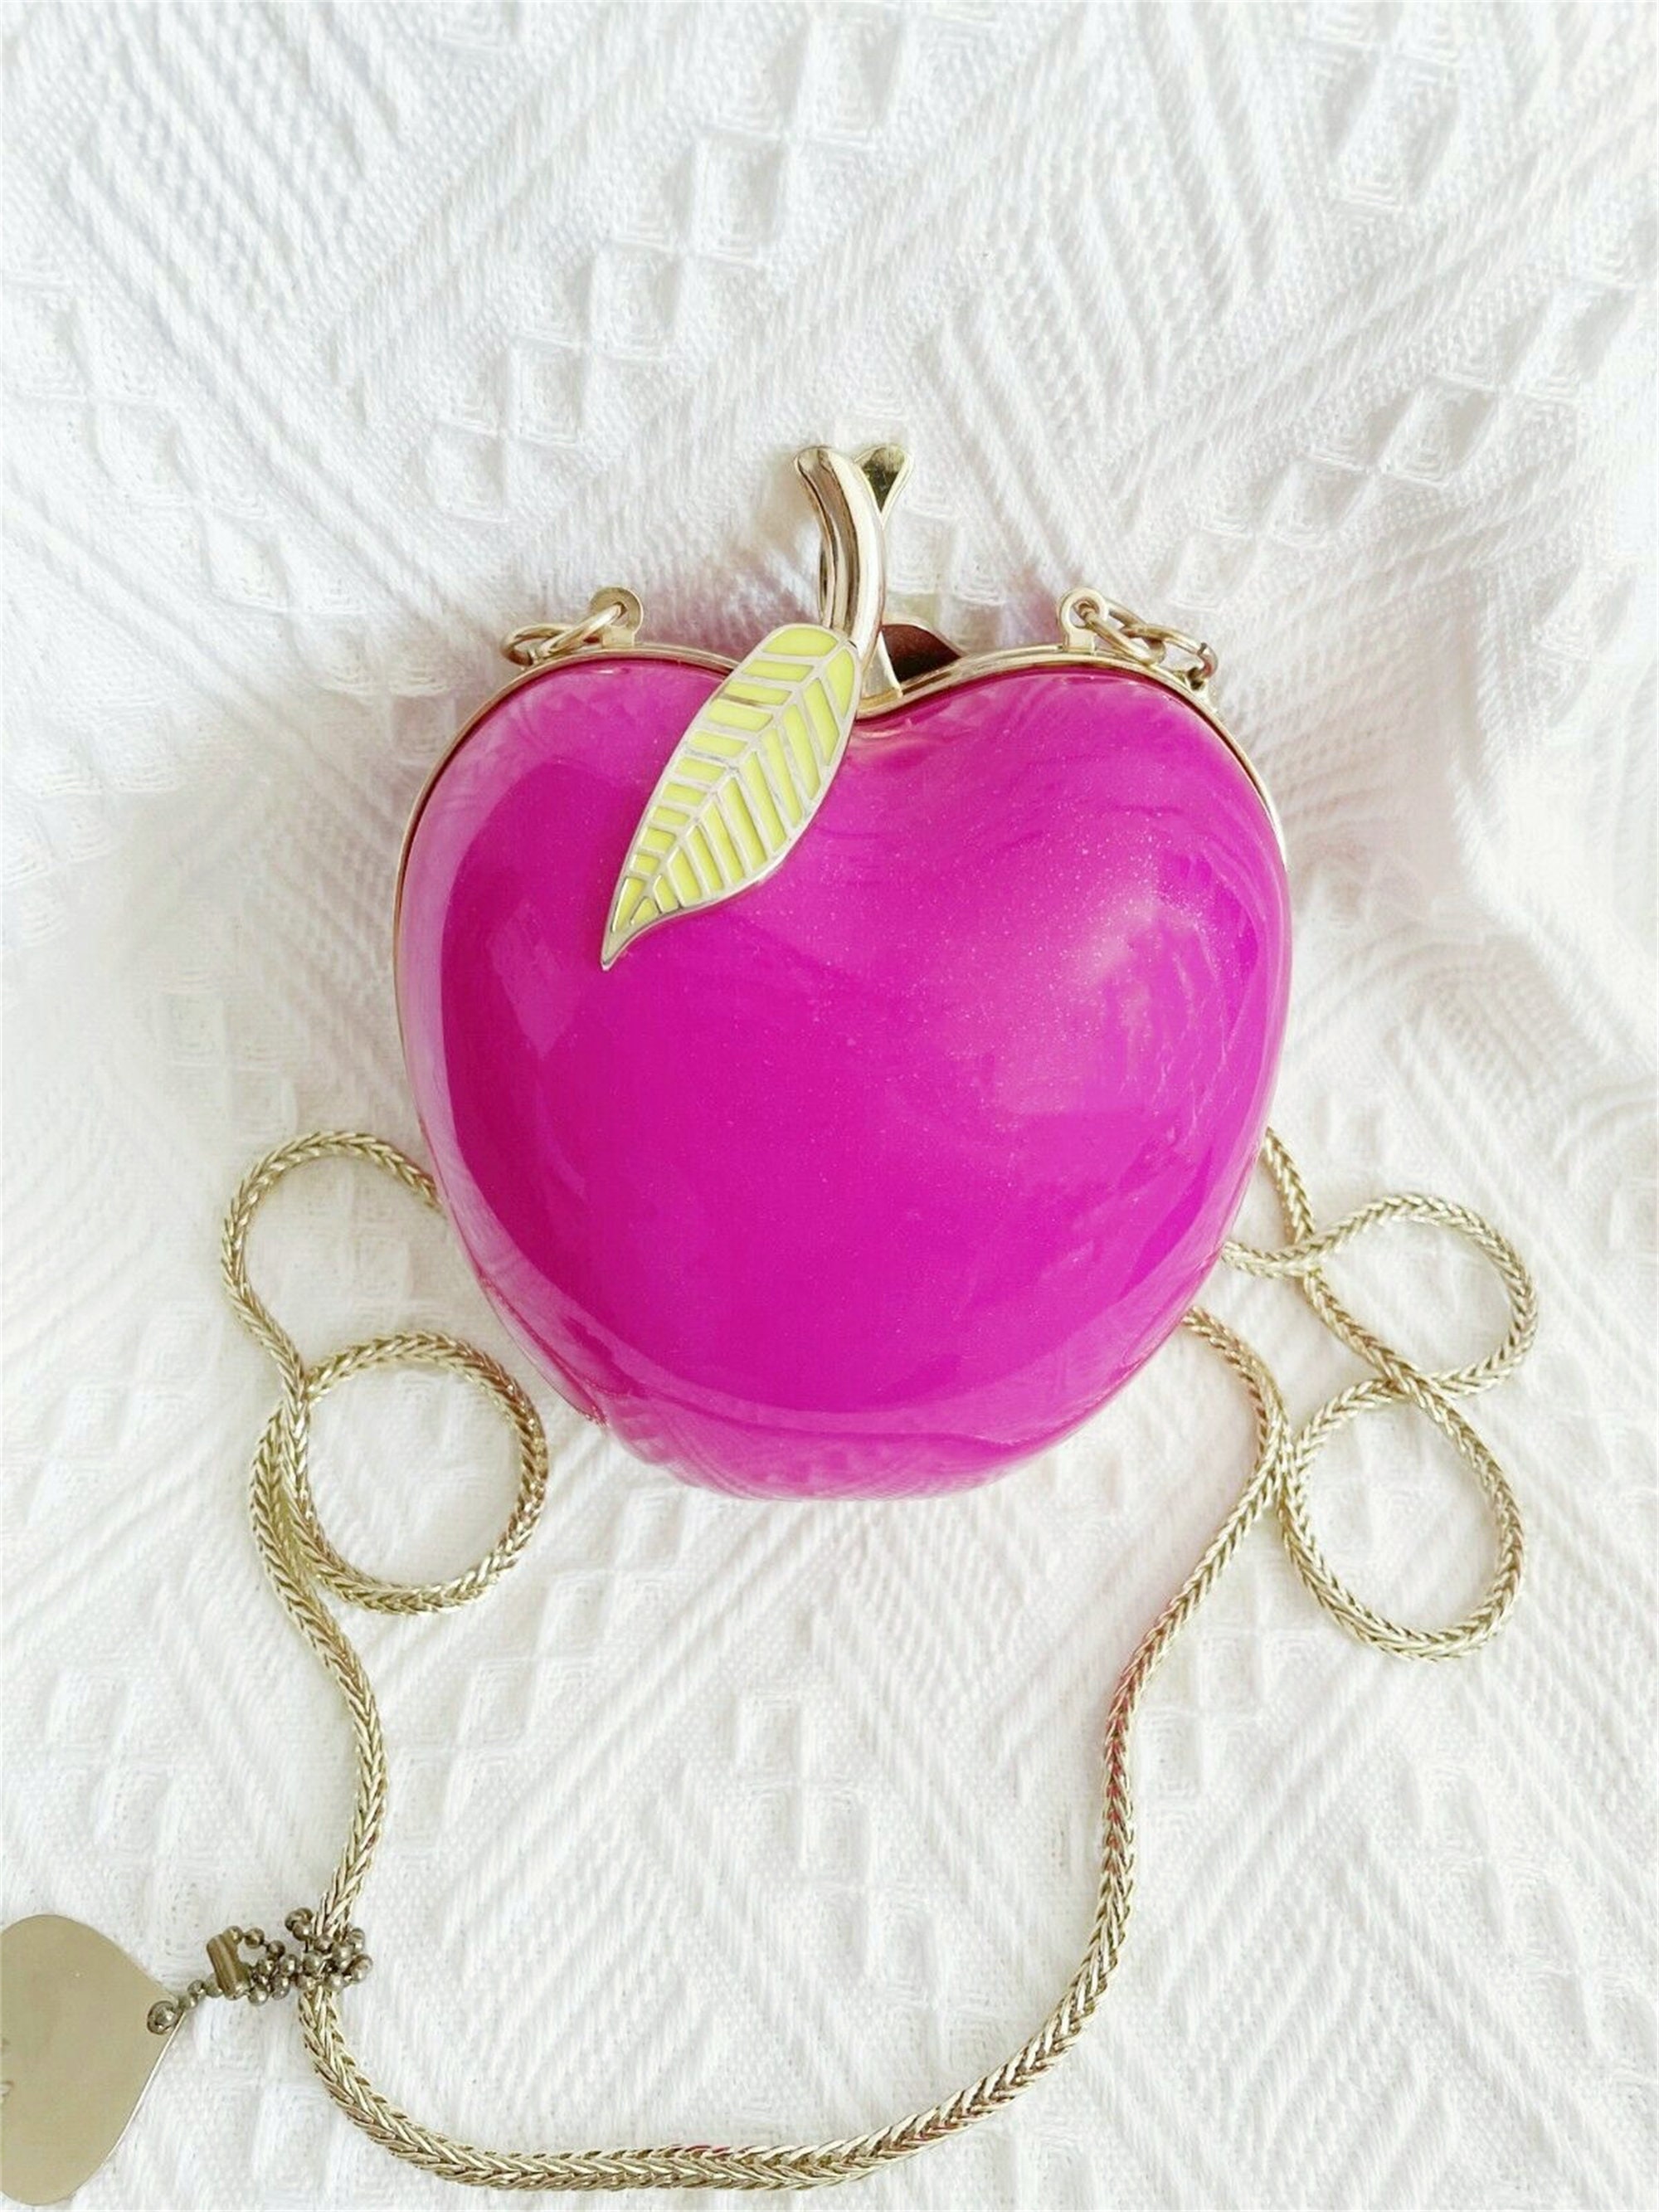 Kate Spade Far From the Tree Resin Apple Clutch/ Bag in Purple - Etsy  Singapore